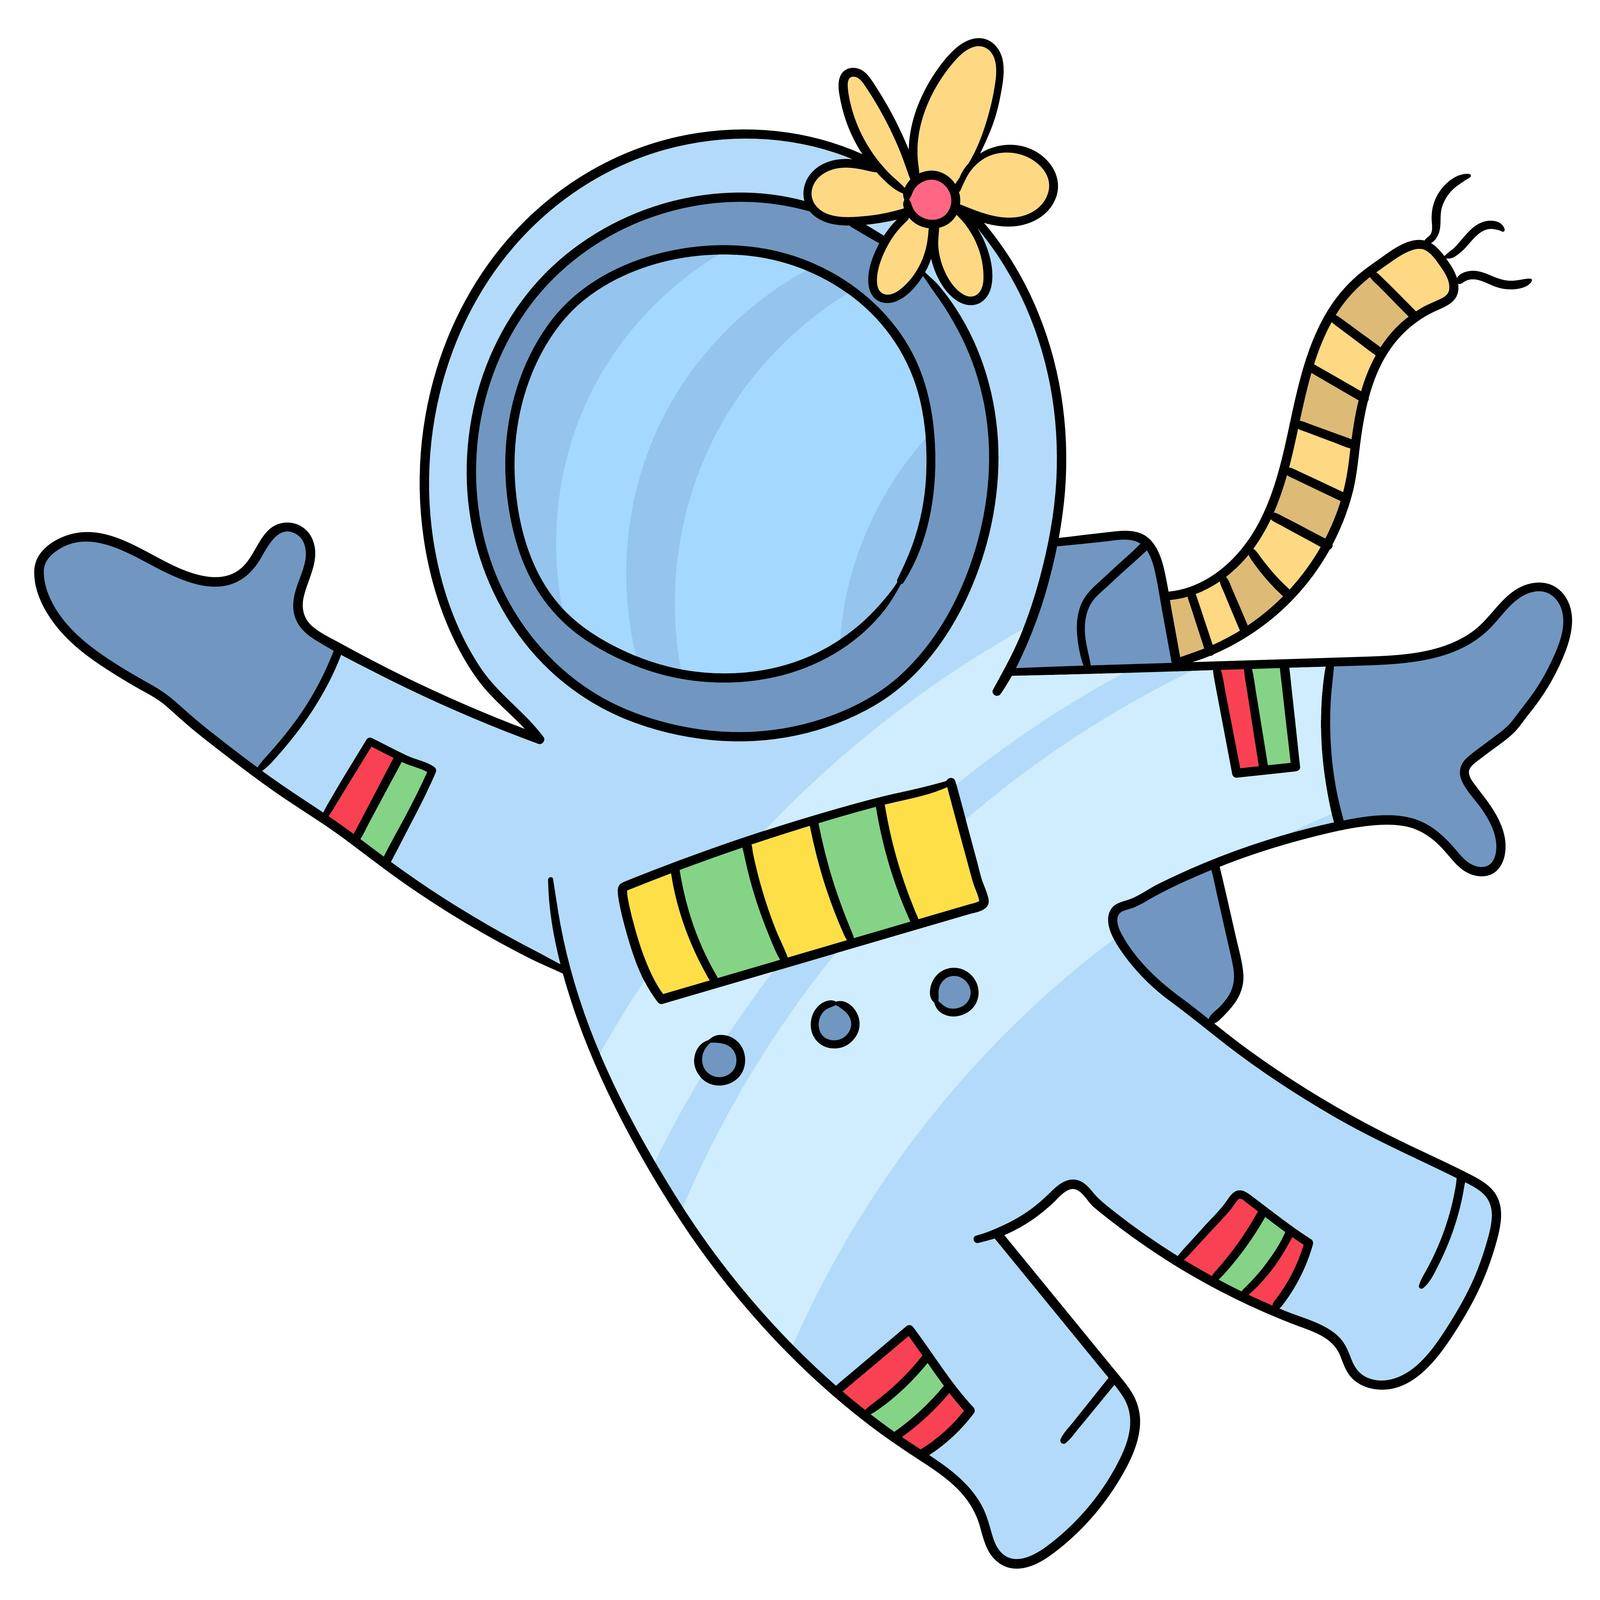 astronauts flying in outer space. doodle icon image by Ar_twork